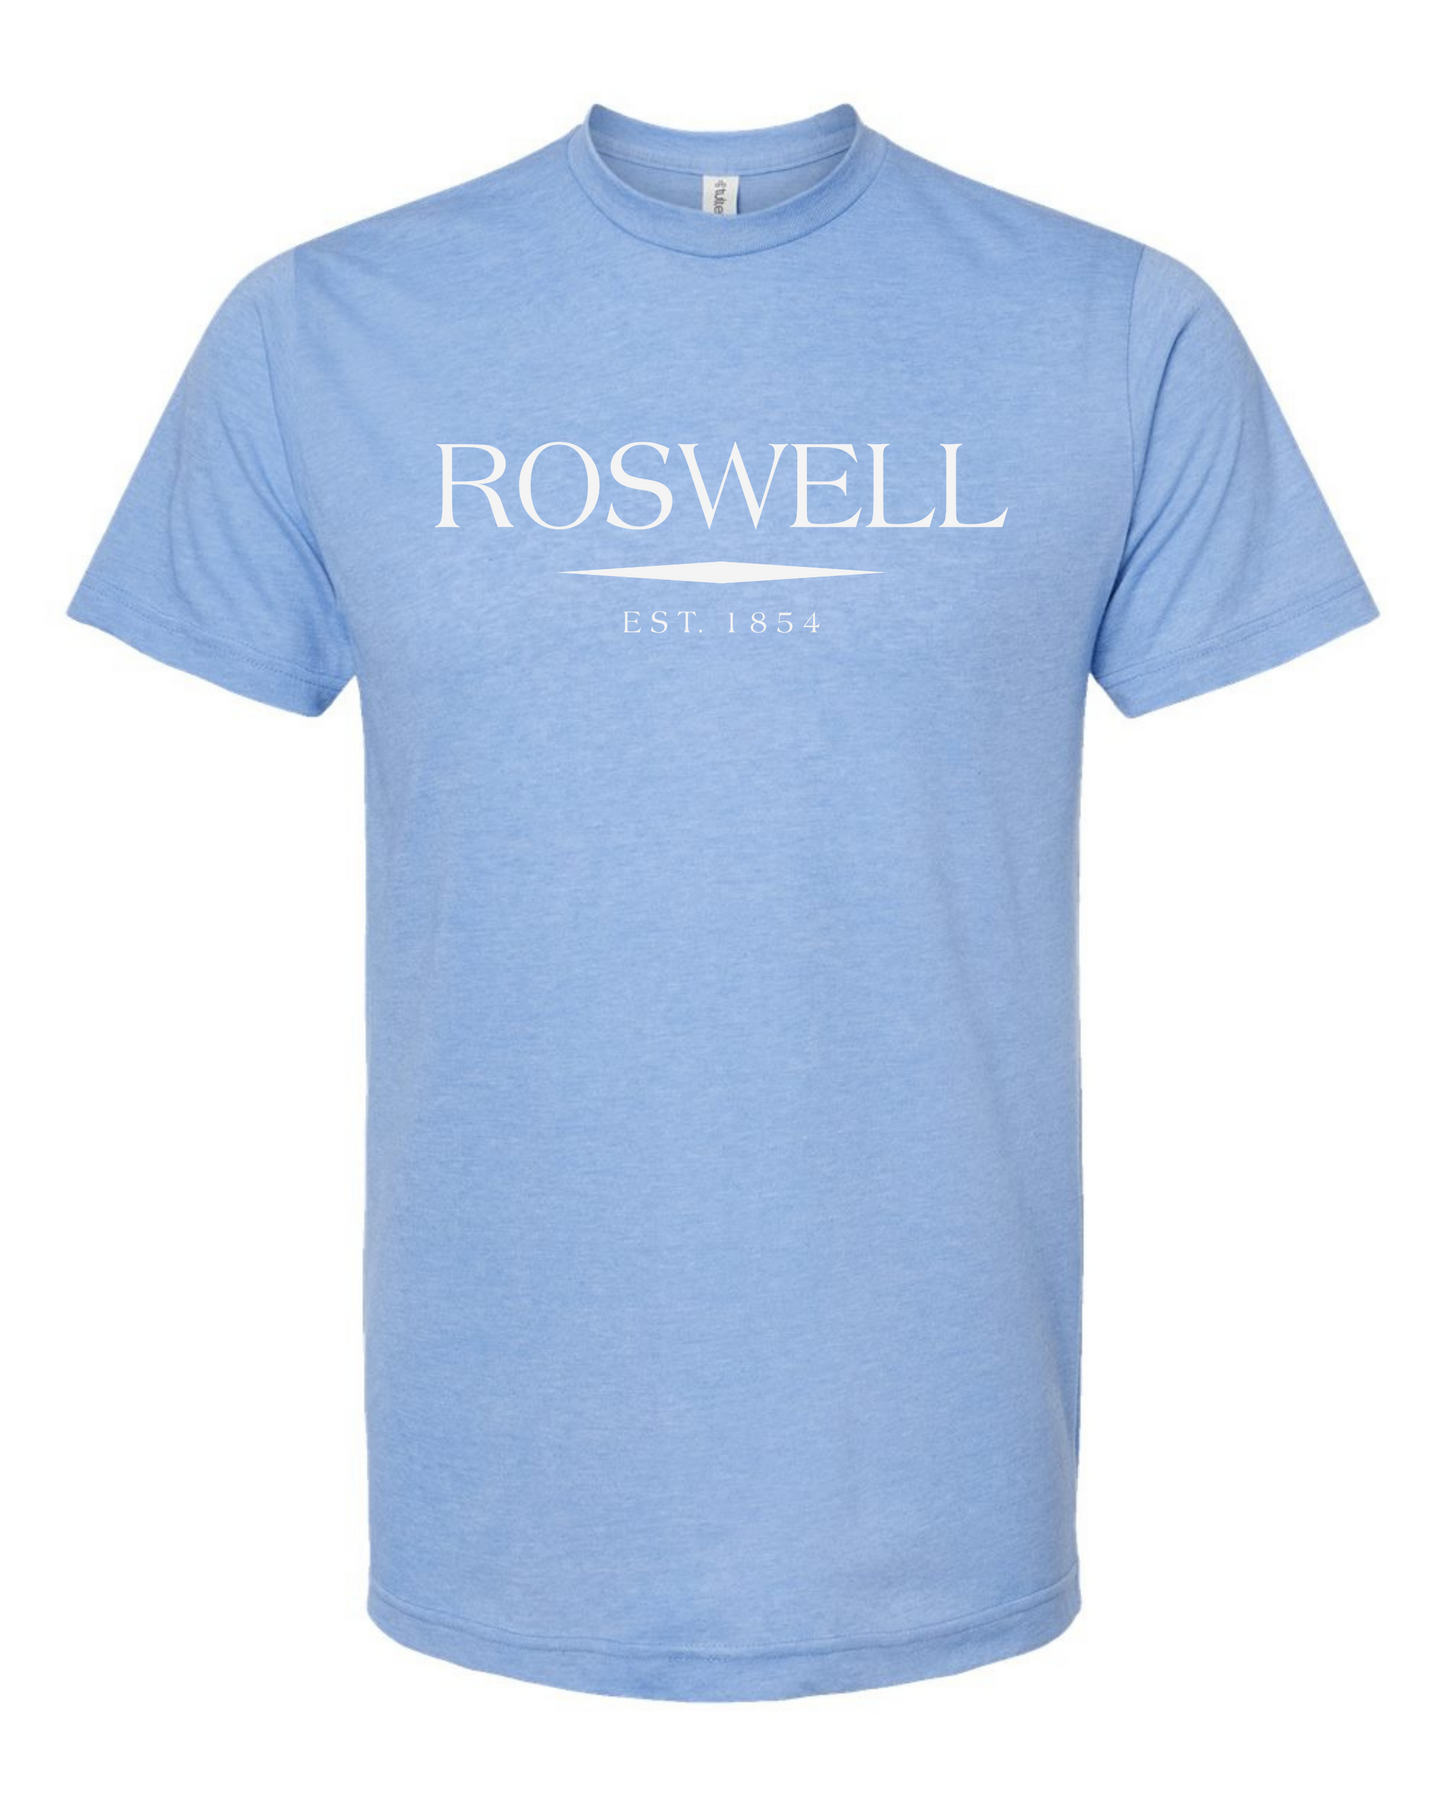 Roswell T-Shirt